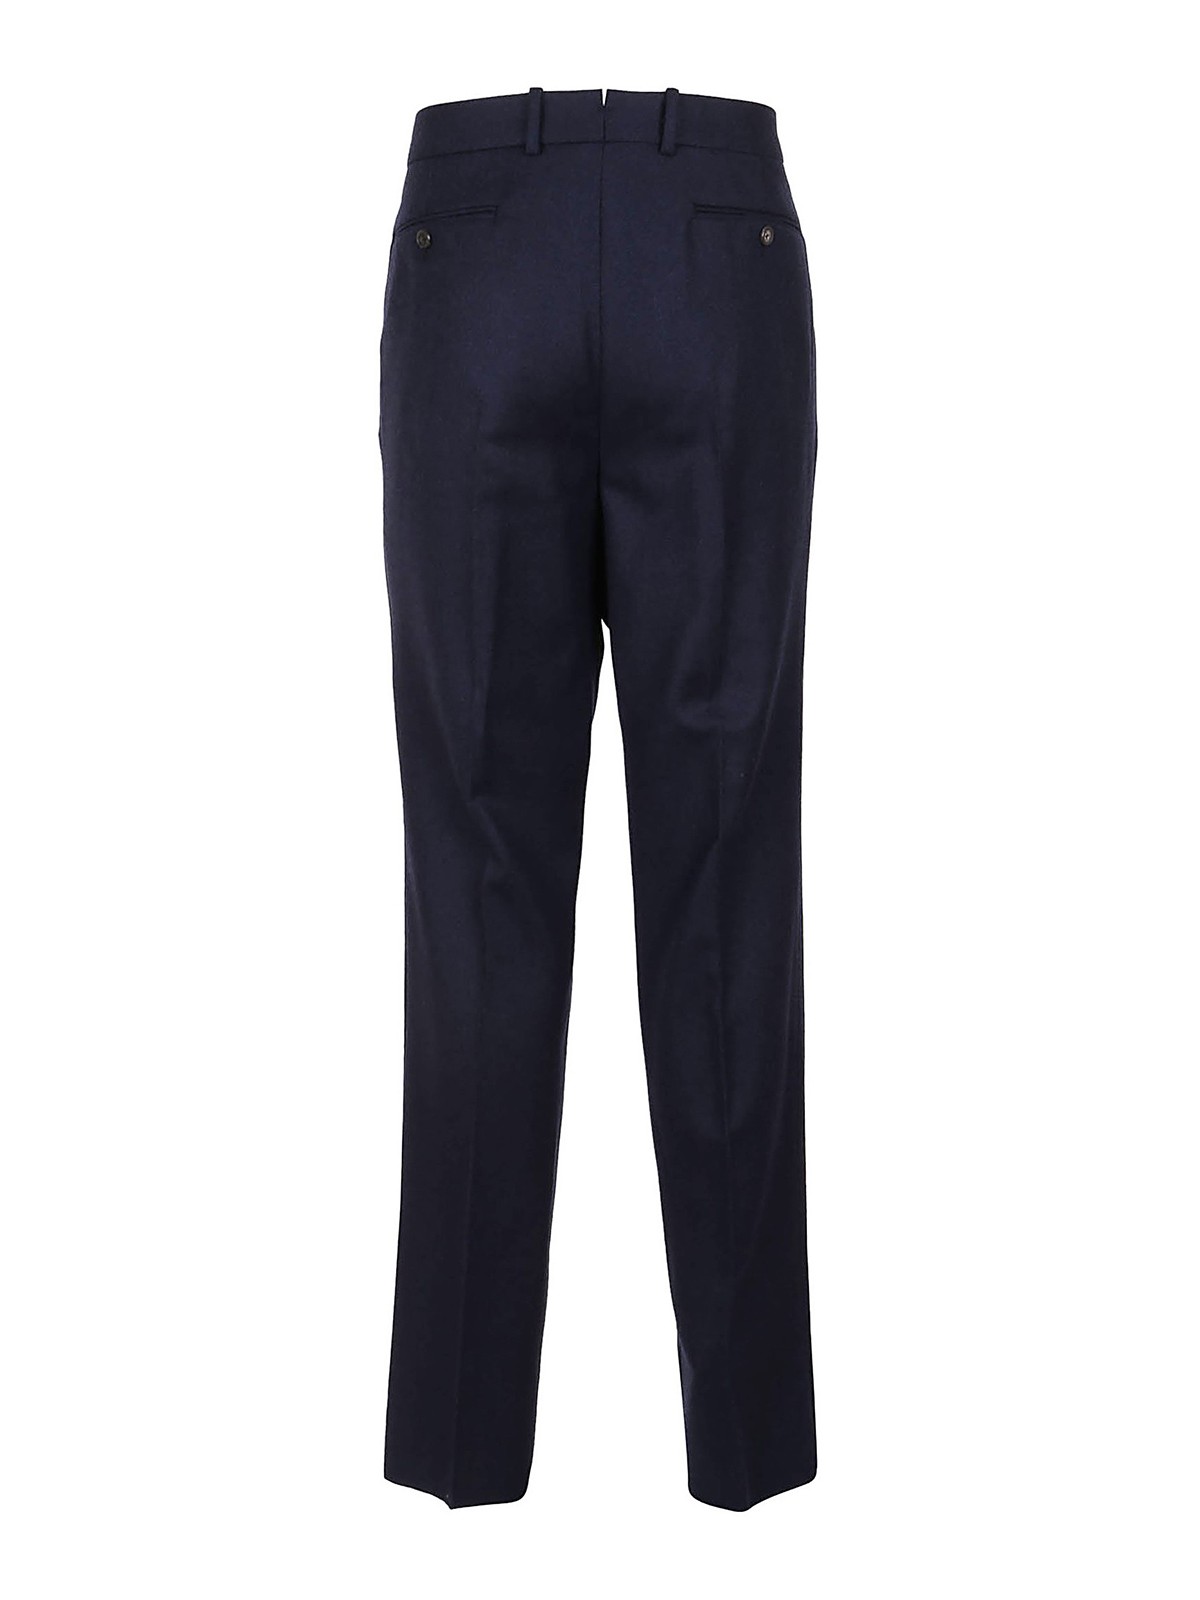 Tailored & Formal trousers Alexander Mcqueen - Wool pants - 615652QPU194100